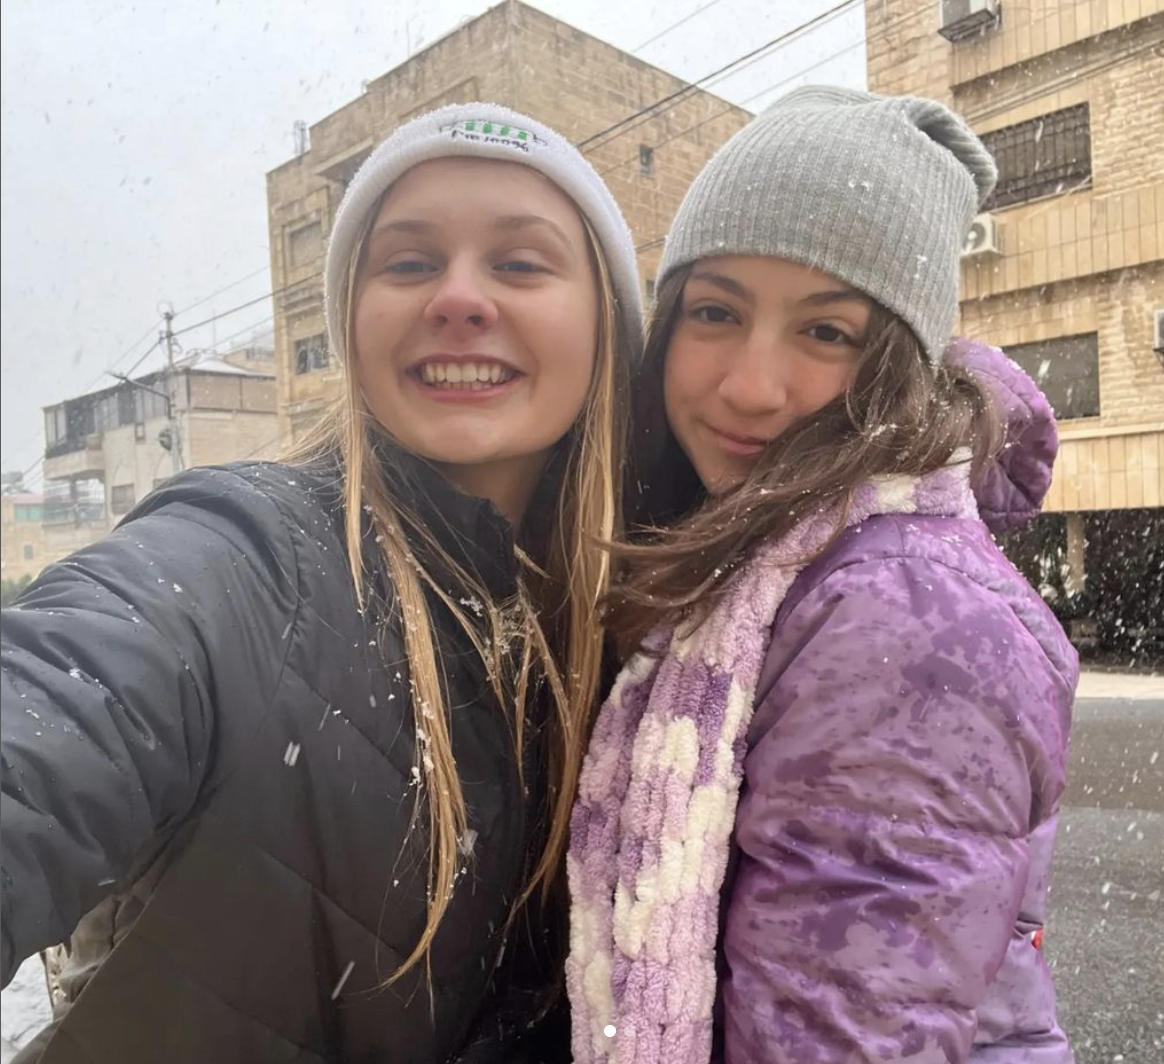 Two girls in hats and coats smiling as snow falls